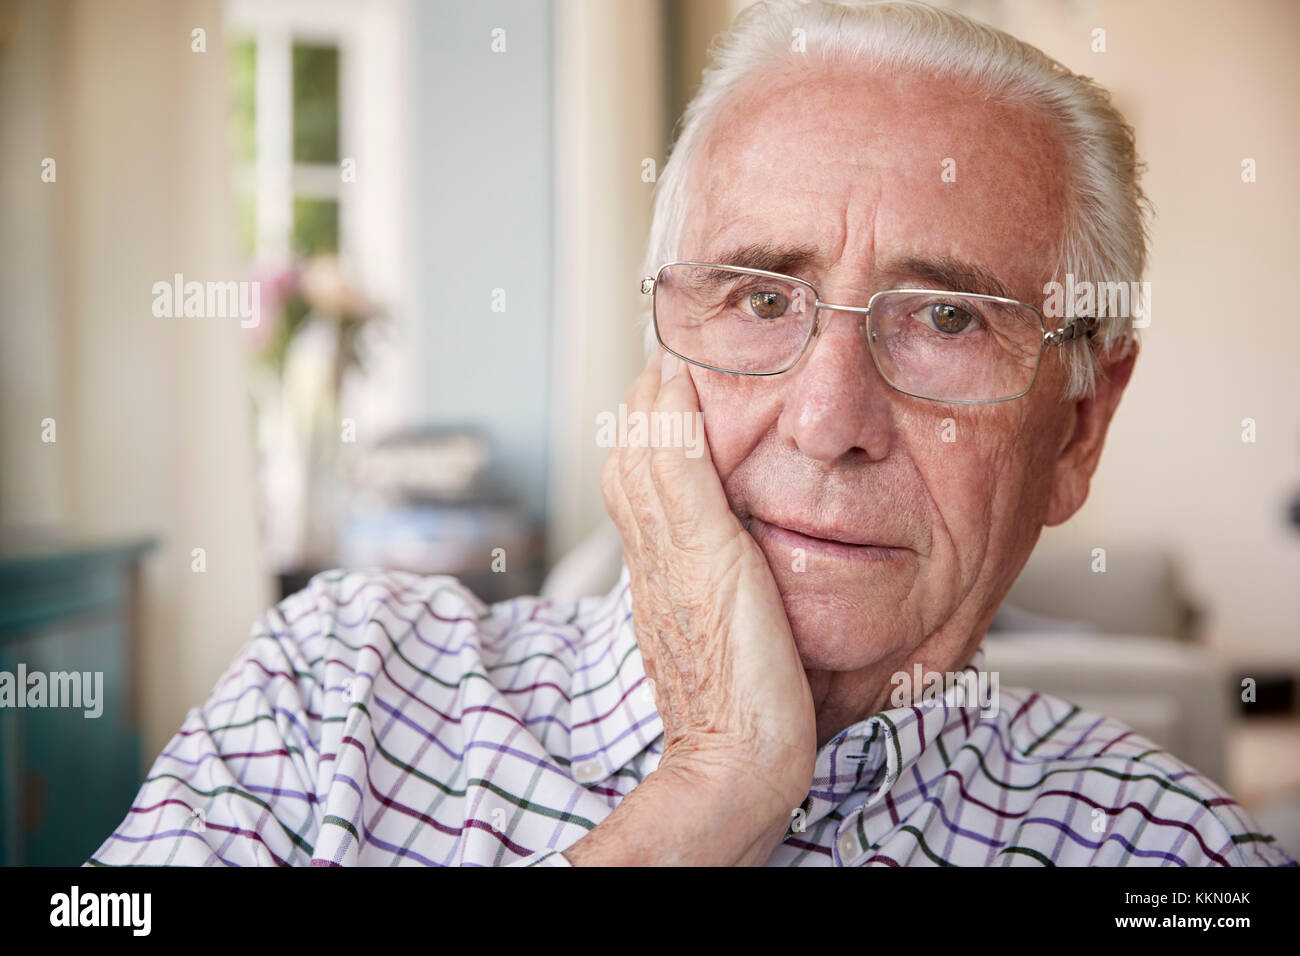 Worried senior man at home looking to camera, close up Stock Photo